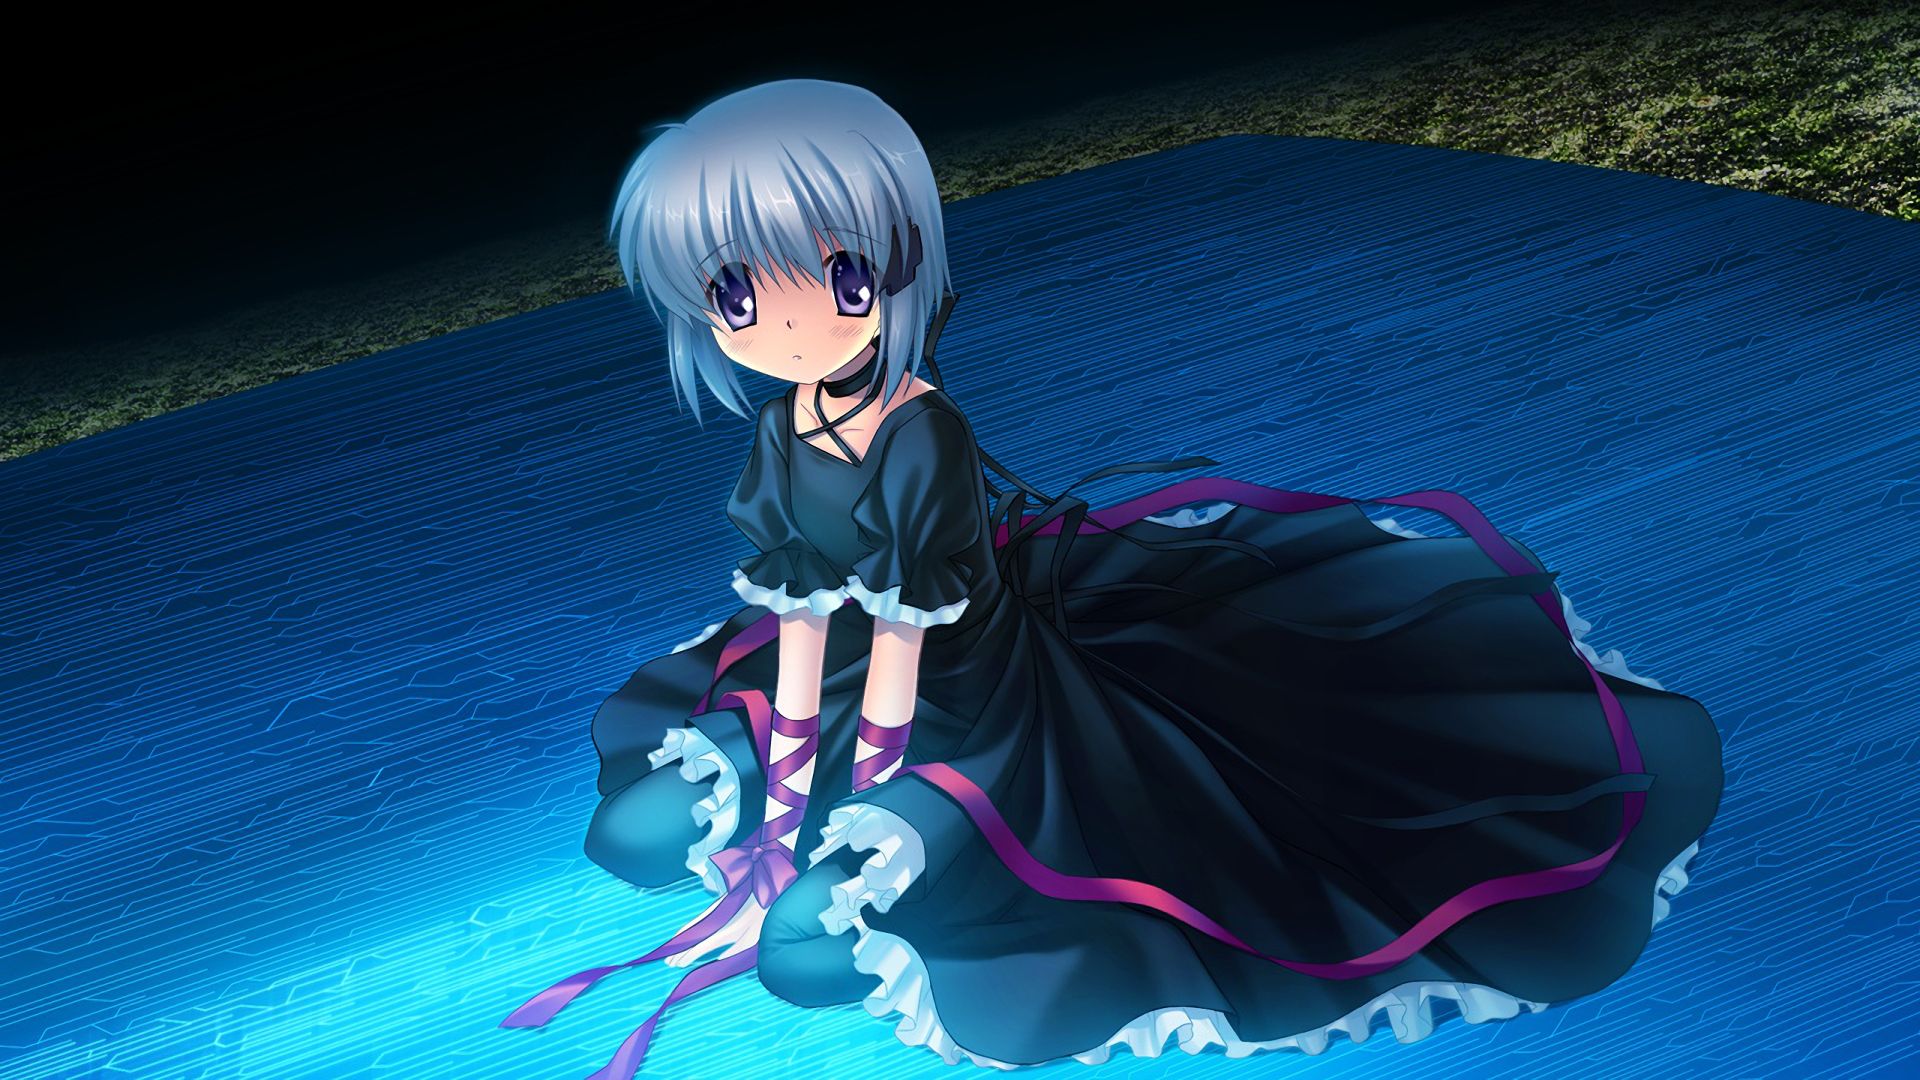 Rewrite Anime - Rewrite Anime updated their cover photo.